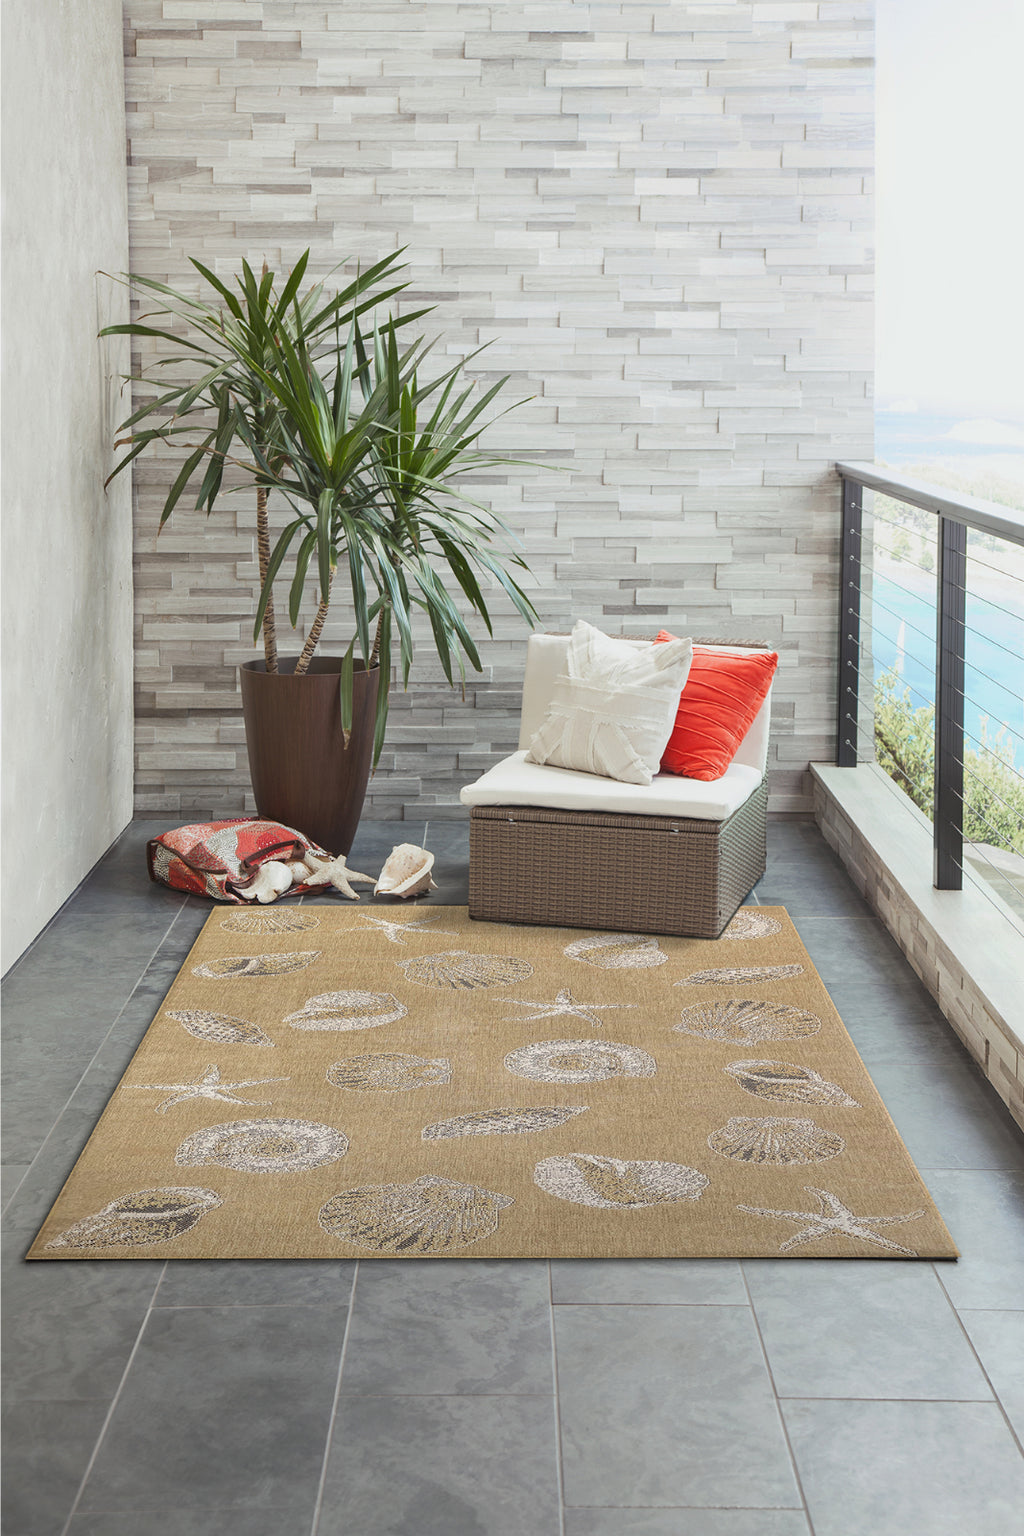 Trans Ocean Carmel 8414/12 Shells Natural Area Rug by Liora Manne Room Scene Image Feature